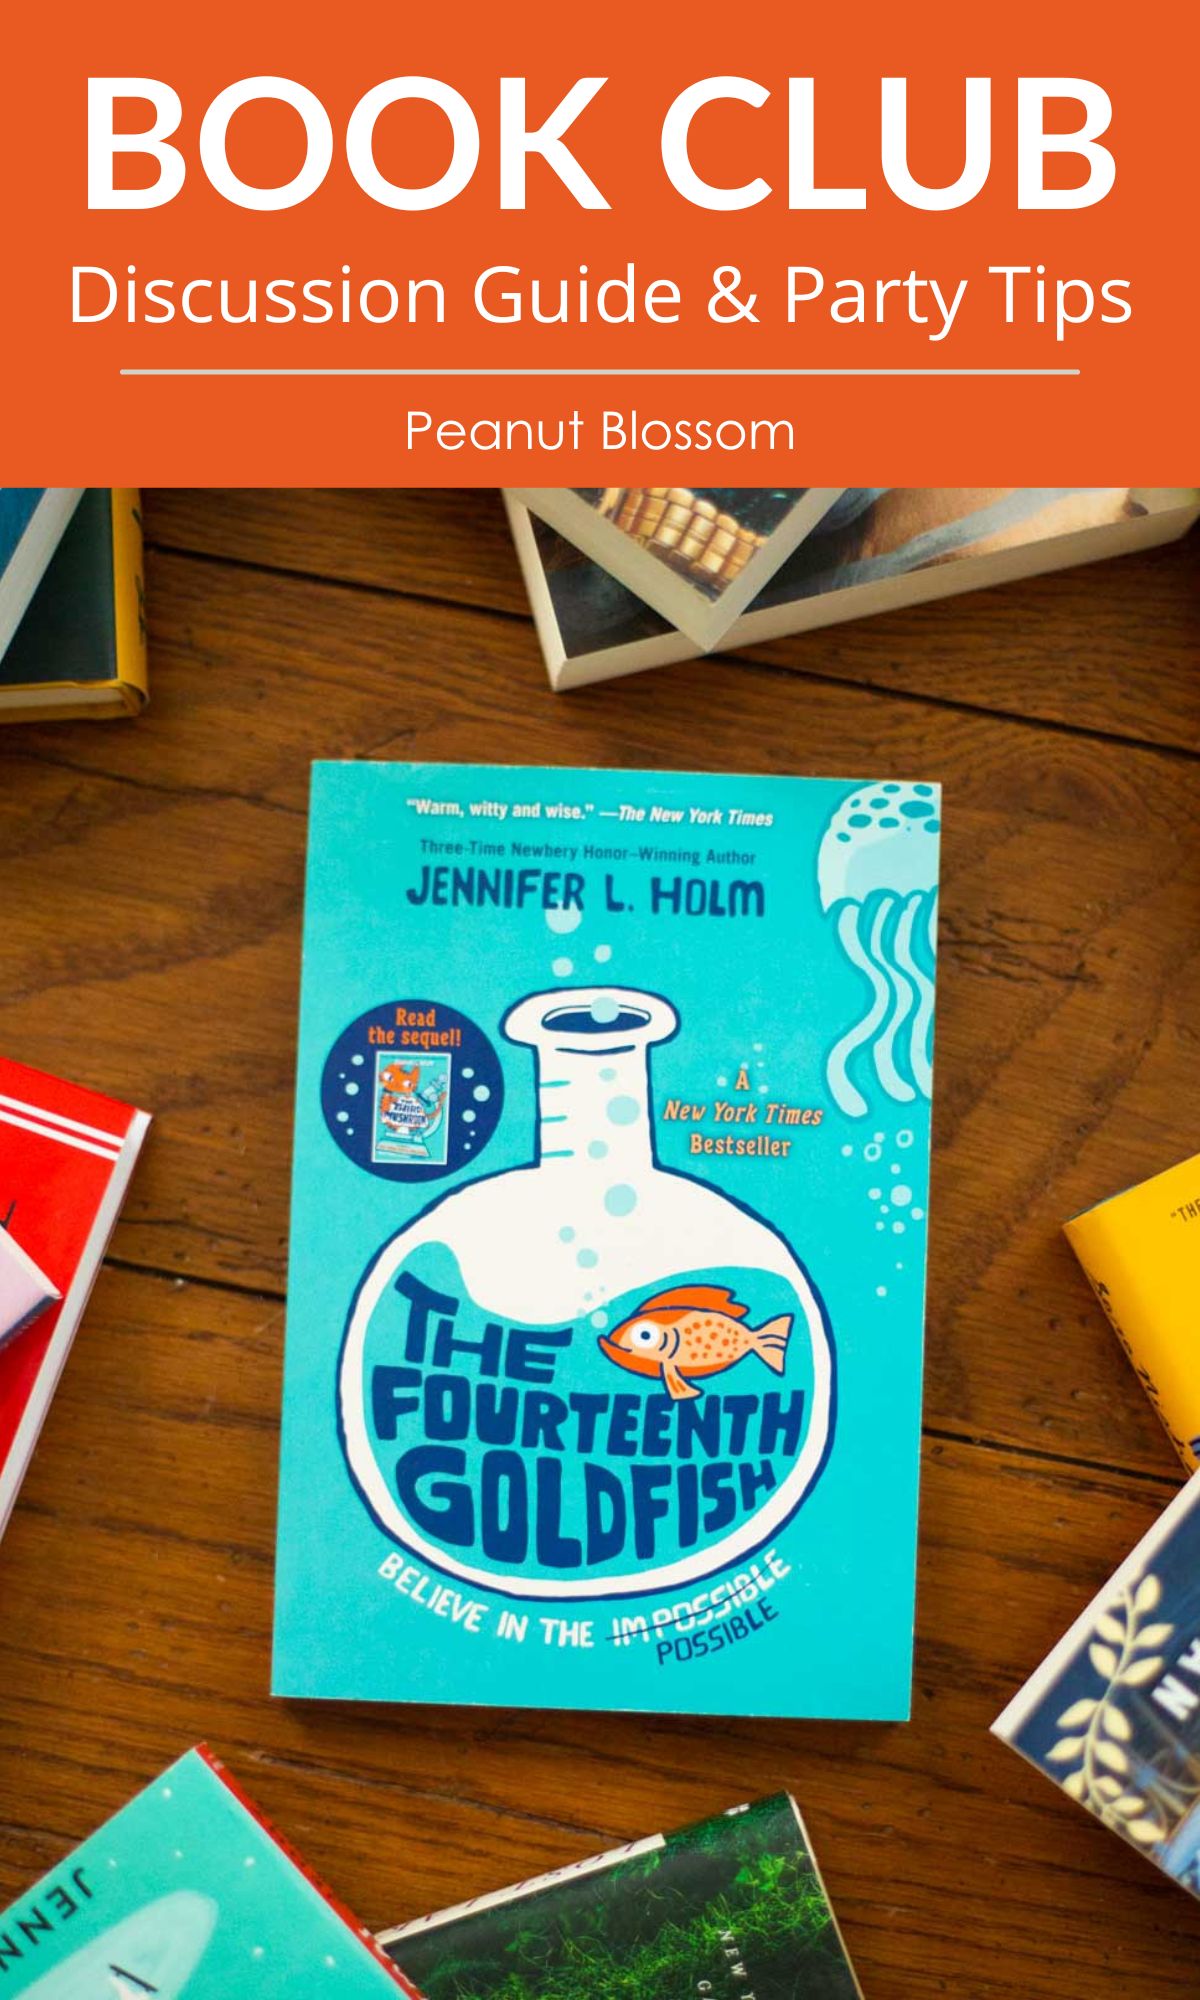 A copy of The Fourteenth Goldfish by Jennifer L. Holm sits on a table.